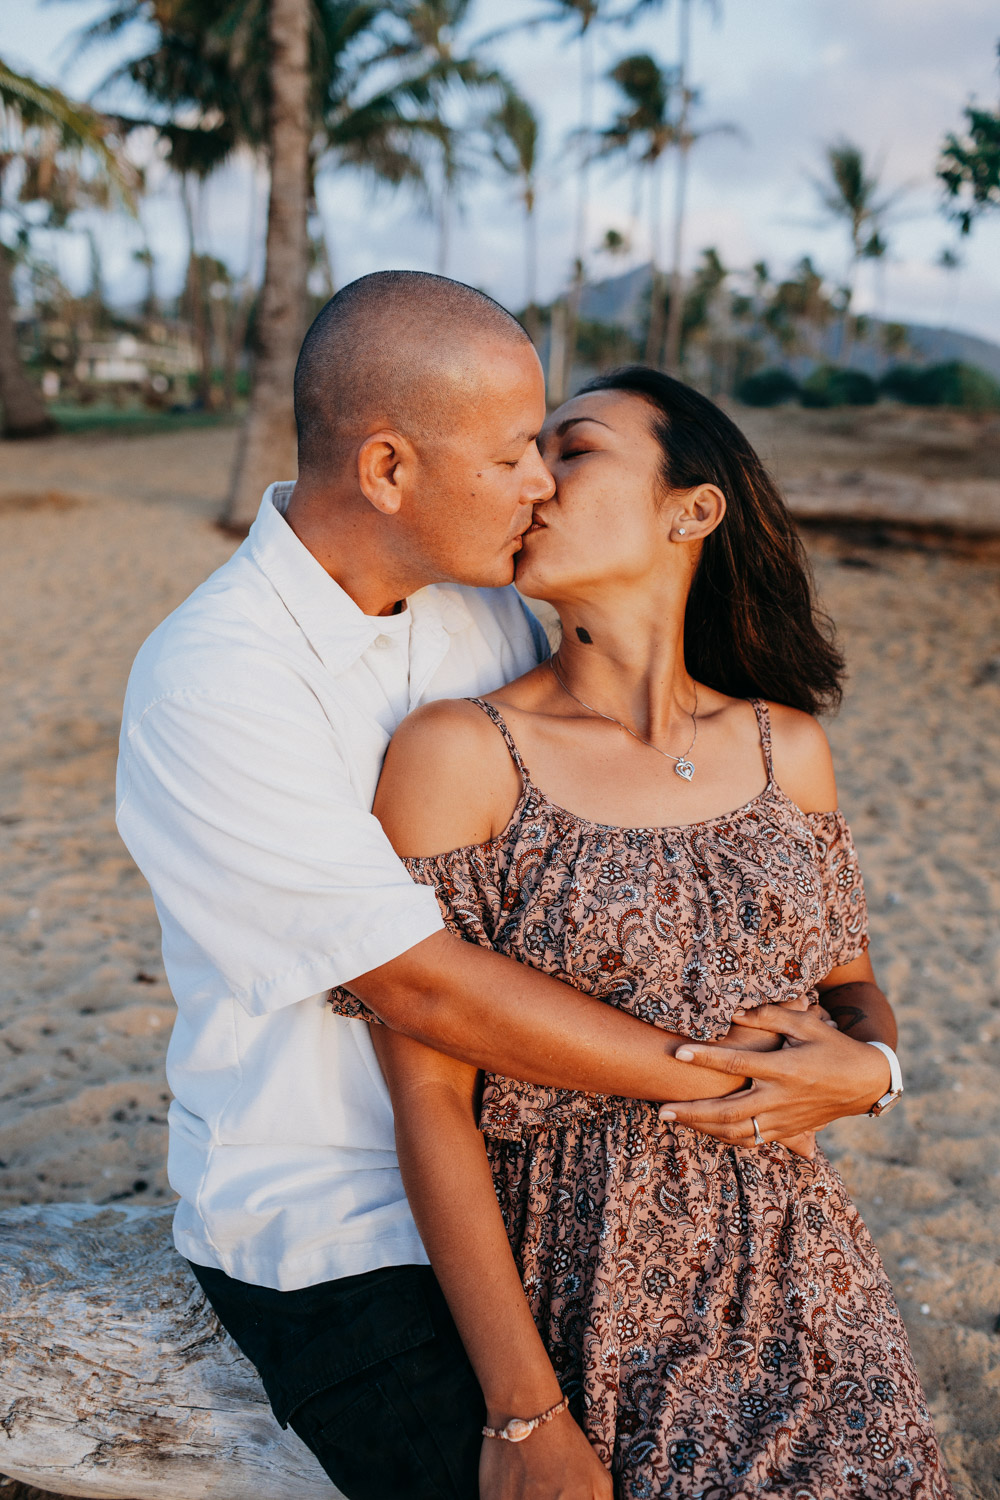 Couple kisses on the beach in Hawaii during their anniversary photoshoot by Liz Koston.